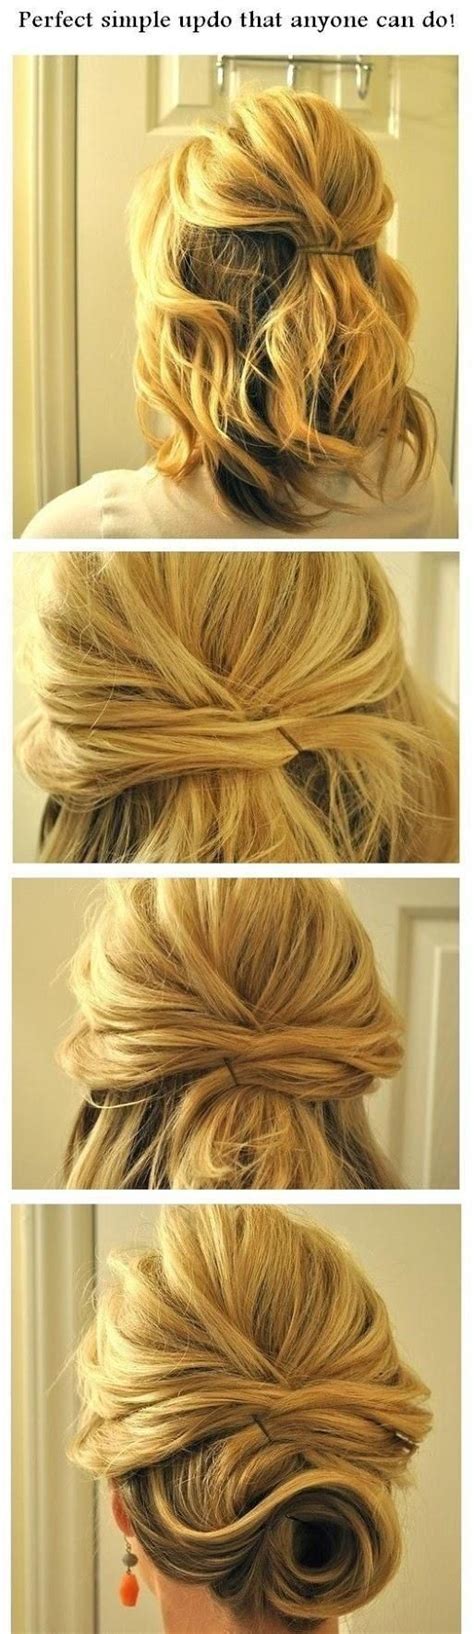 12 Short Updo Hairstyles Ideas Anyone Can Do Popular